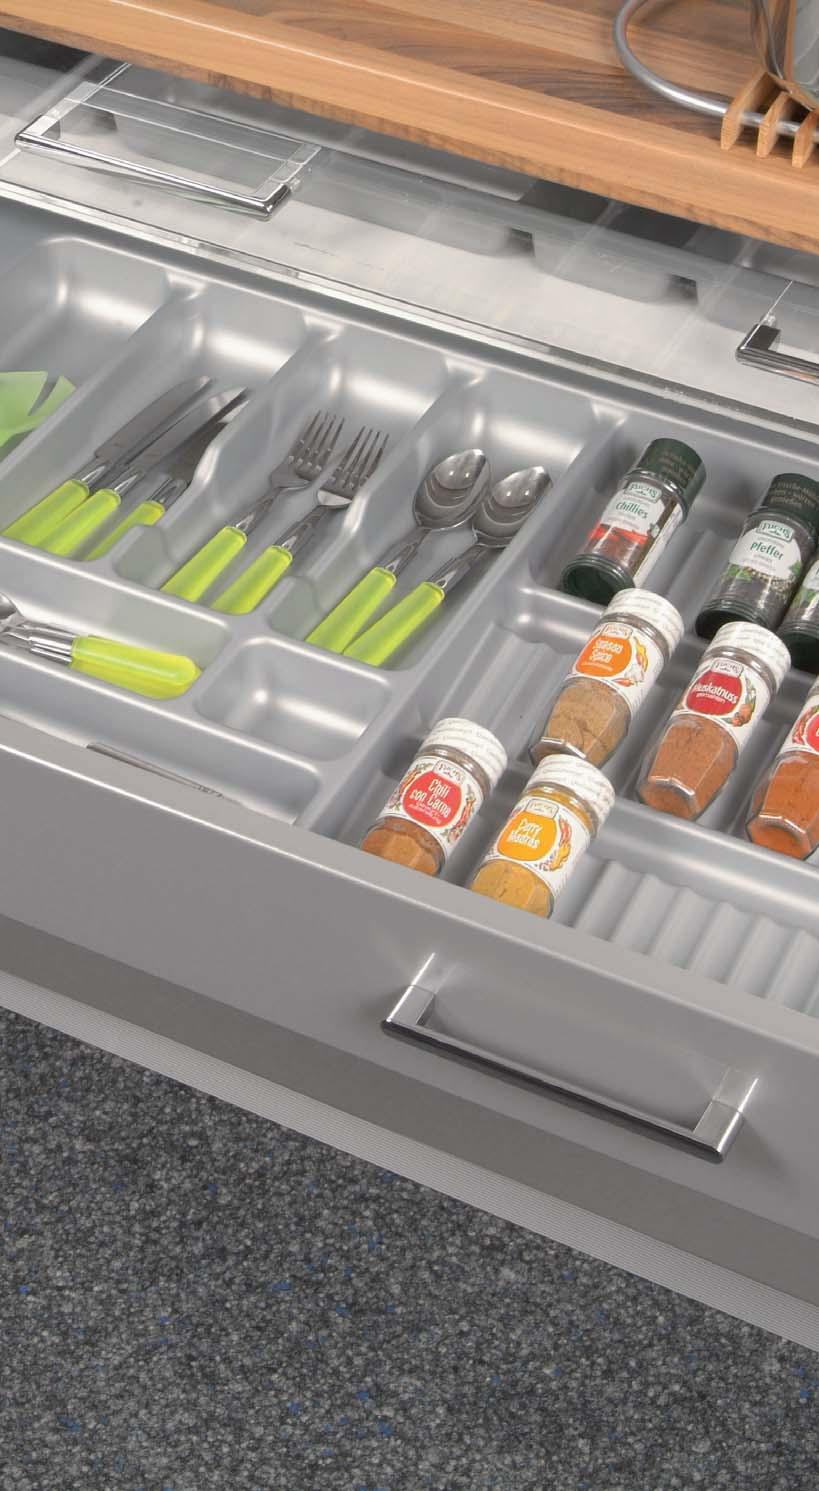 SPICE INSERTS Cutlery tray depth: 440-490 mm Plastic, vacuum formed. For drawer depth 500 mm. Material thickness: 2.